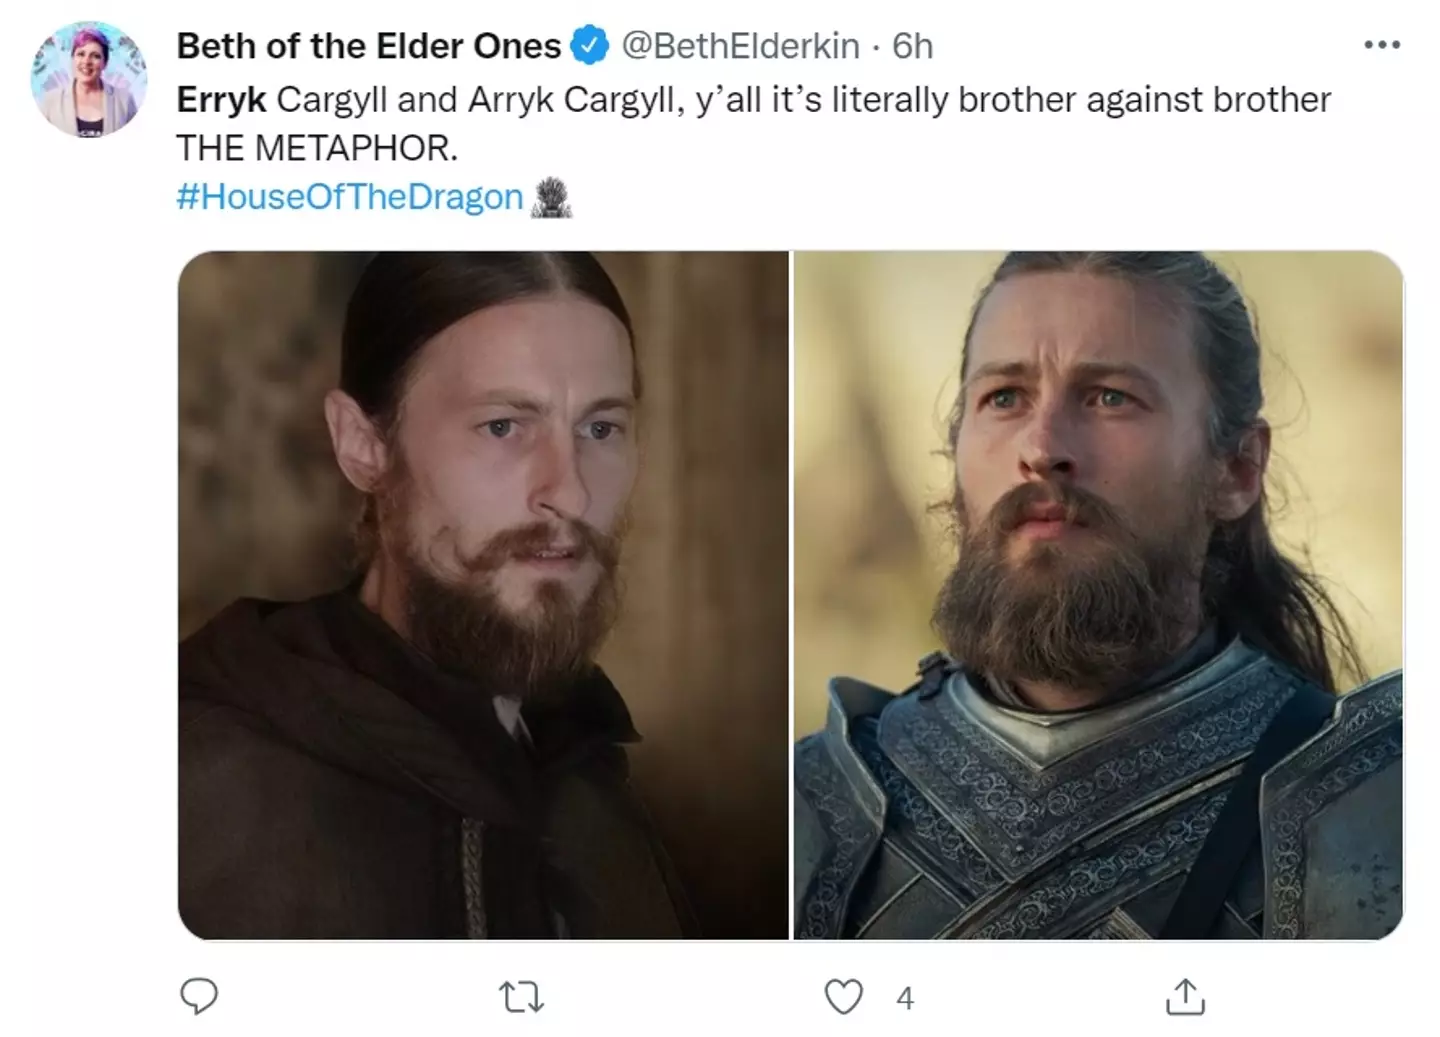 If House of the Dragon follows the plot of the book it'll be brother against brother.